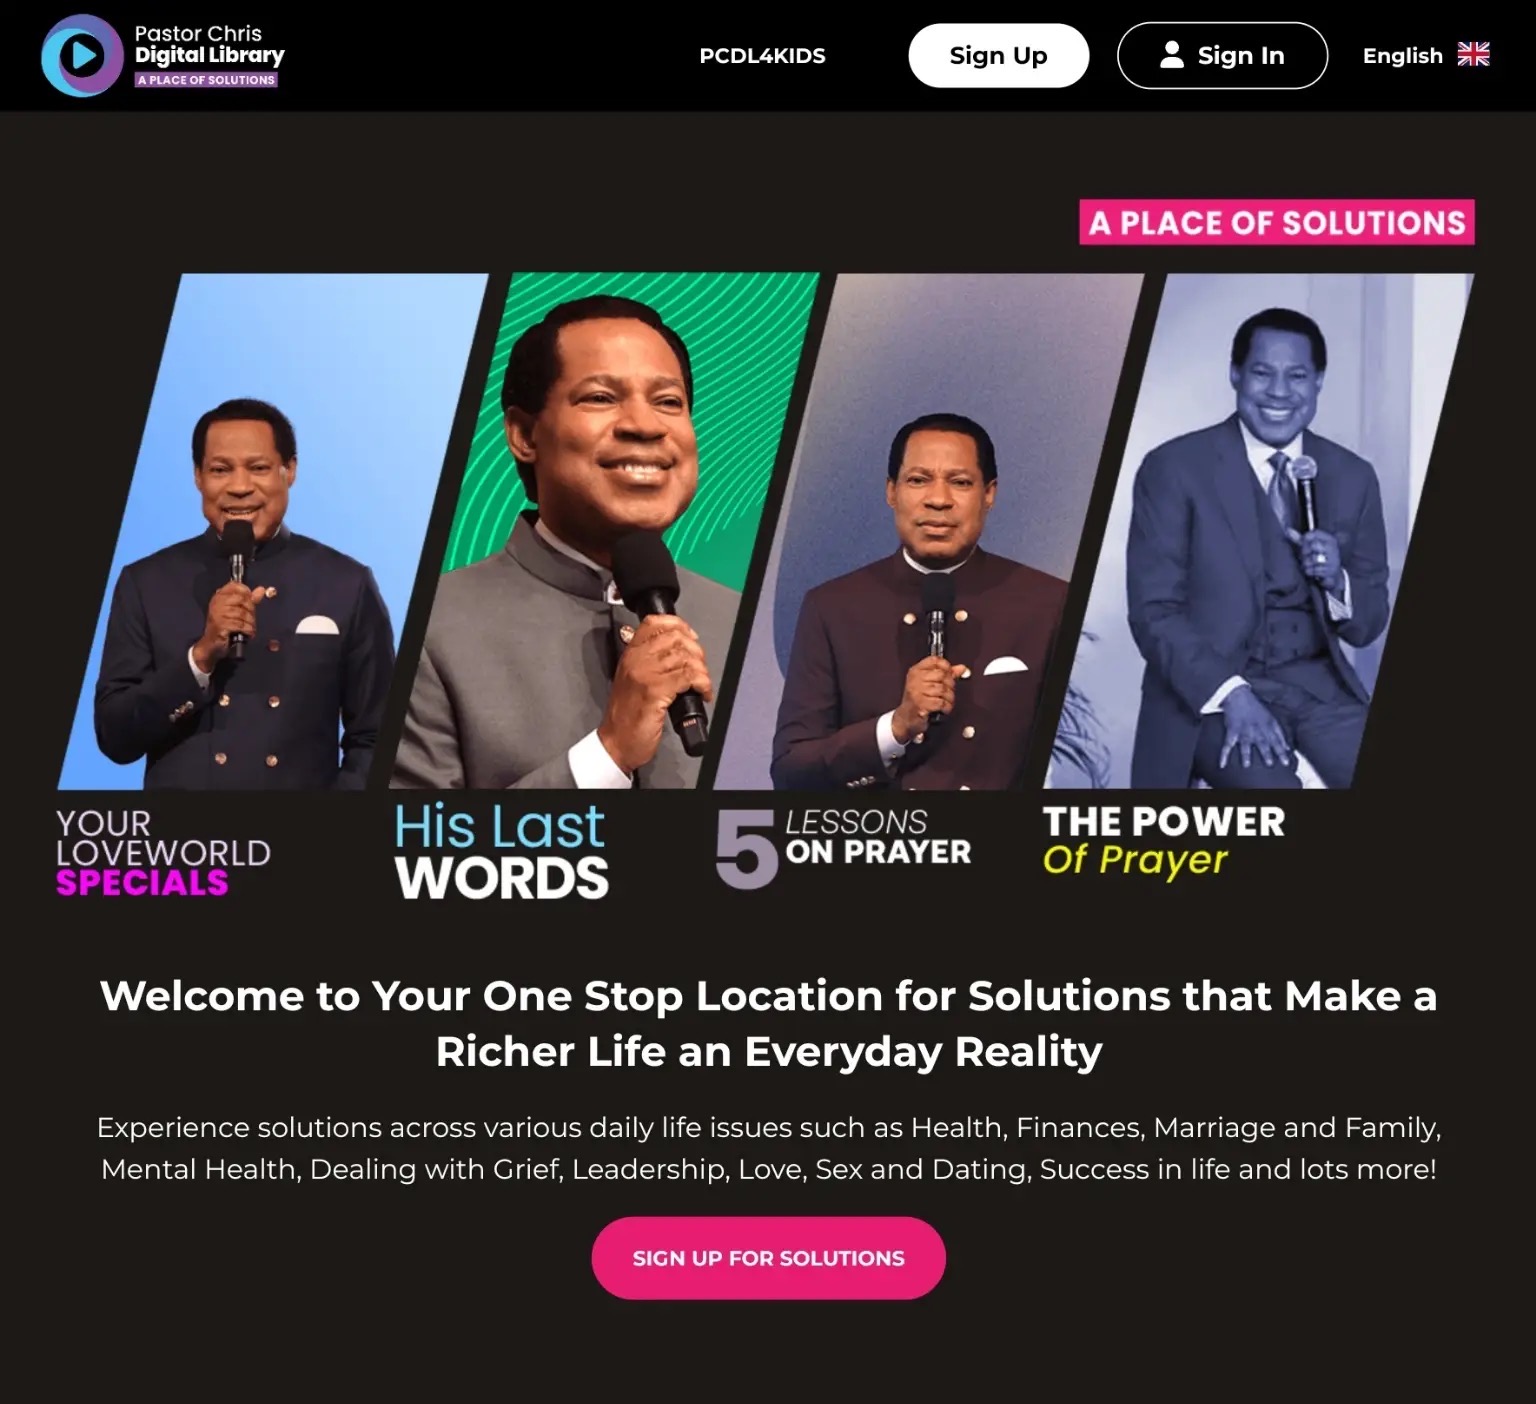 Introducing the Pastor Chris Digital Library (PCDL) Your Gateway to Unlimited Solutions for Everyday Life Issues